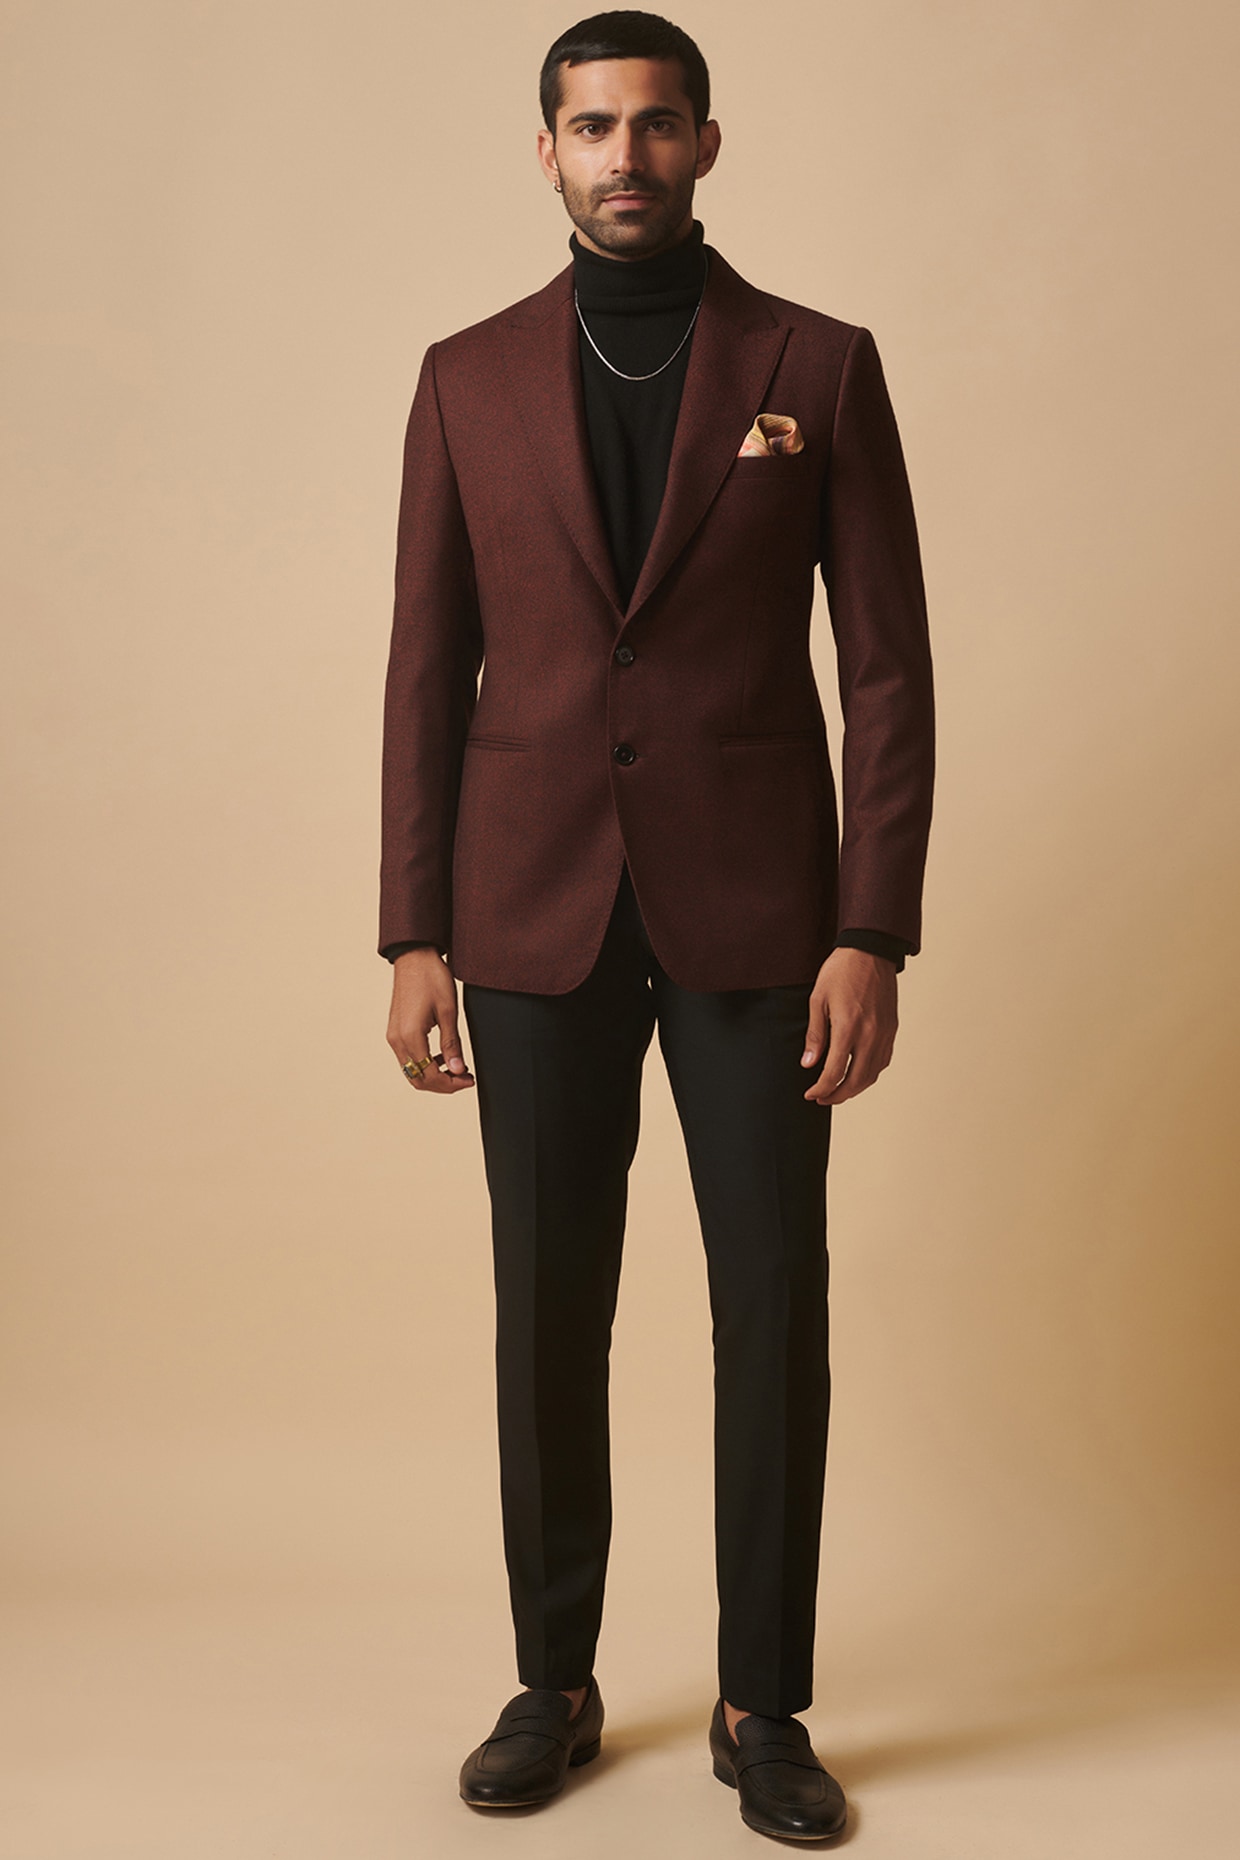 Burgundy Pants with Blazer Outfits For Men (188 ideas & outfits) | Lookastic